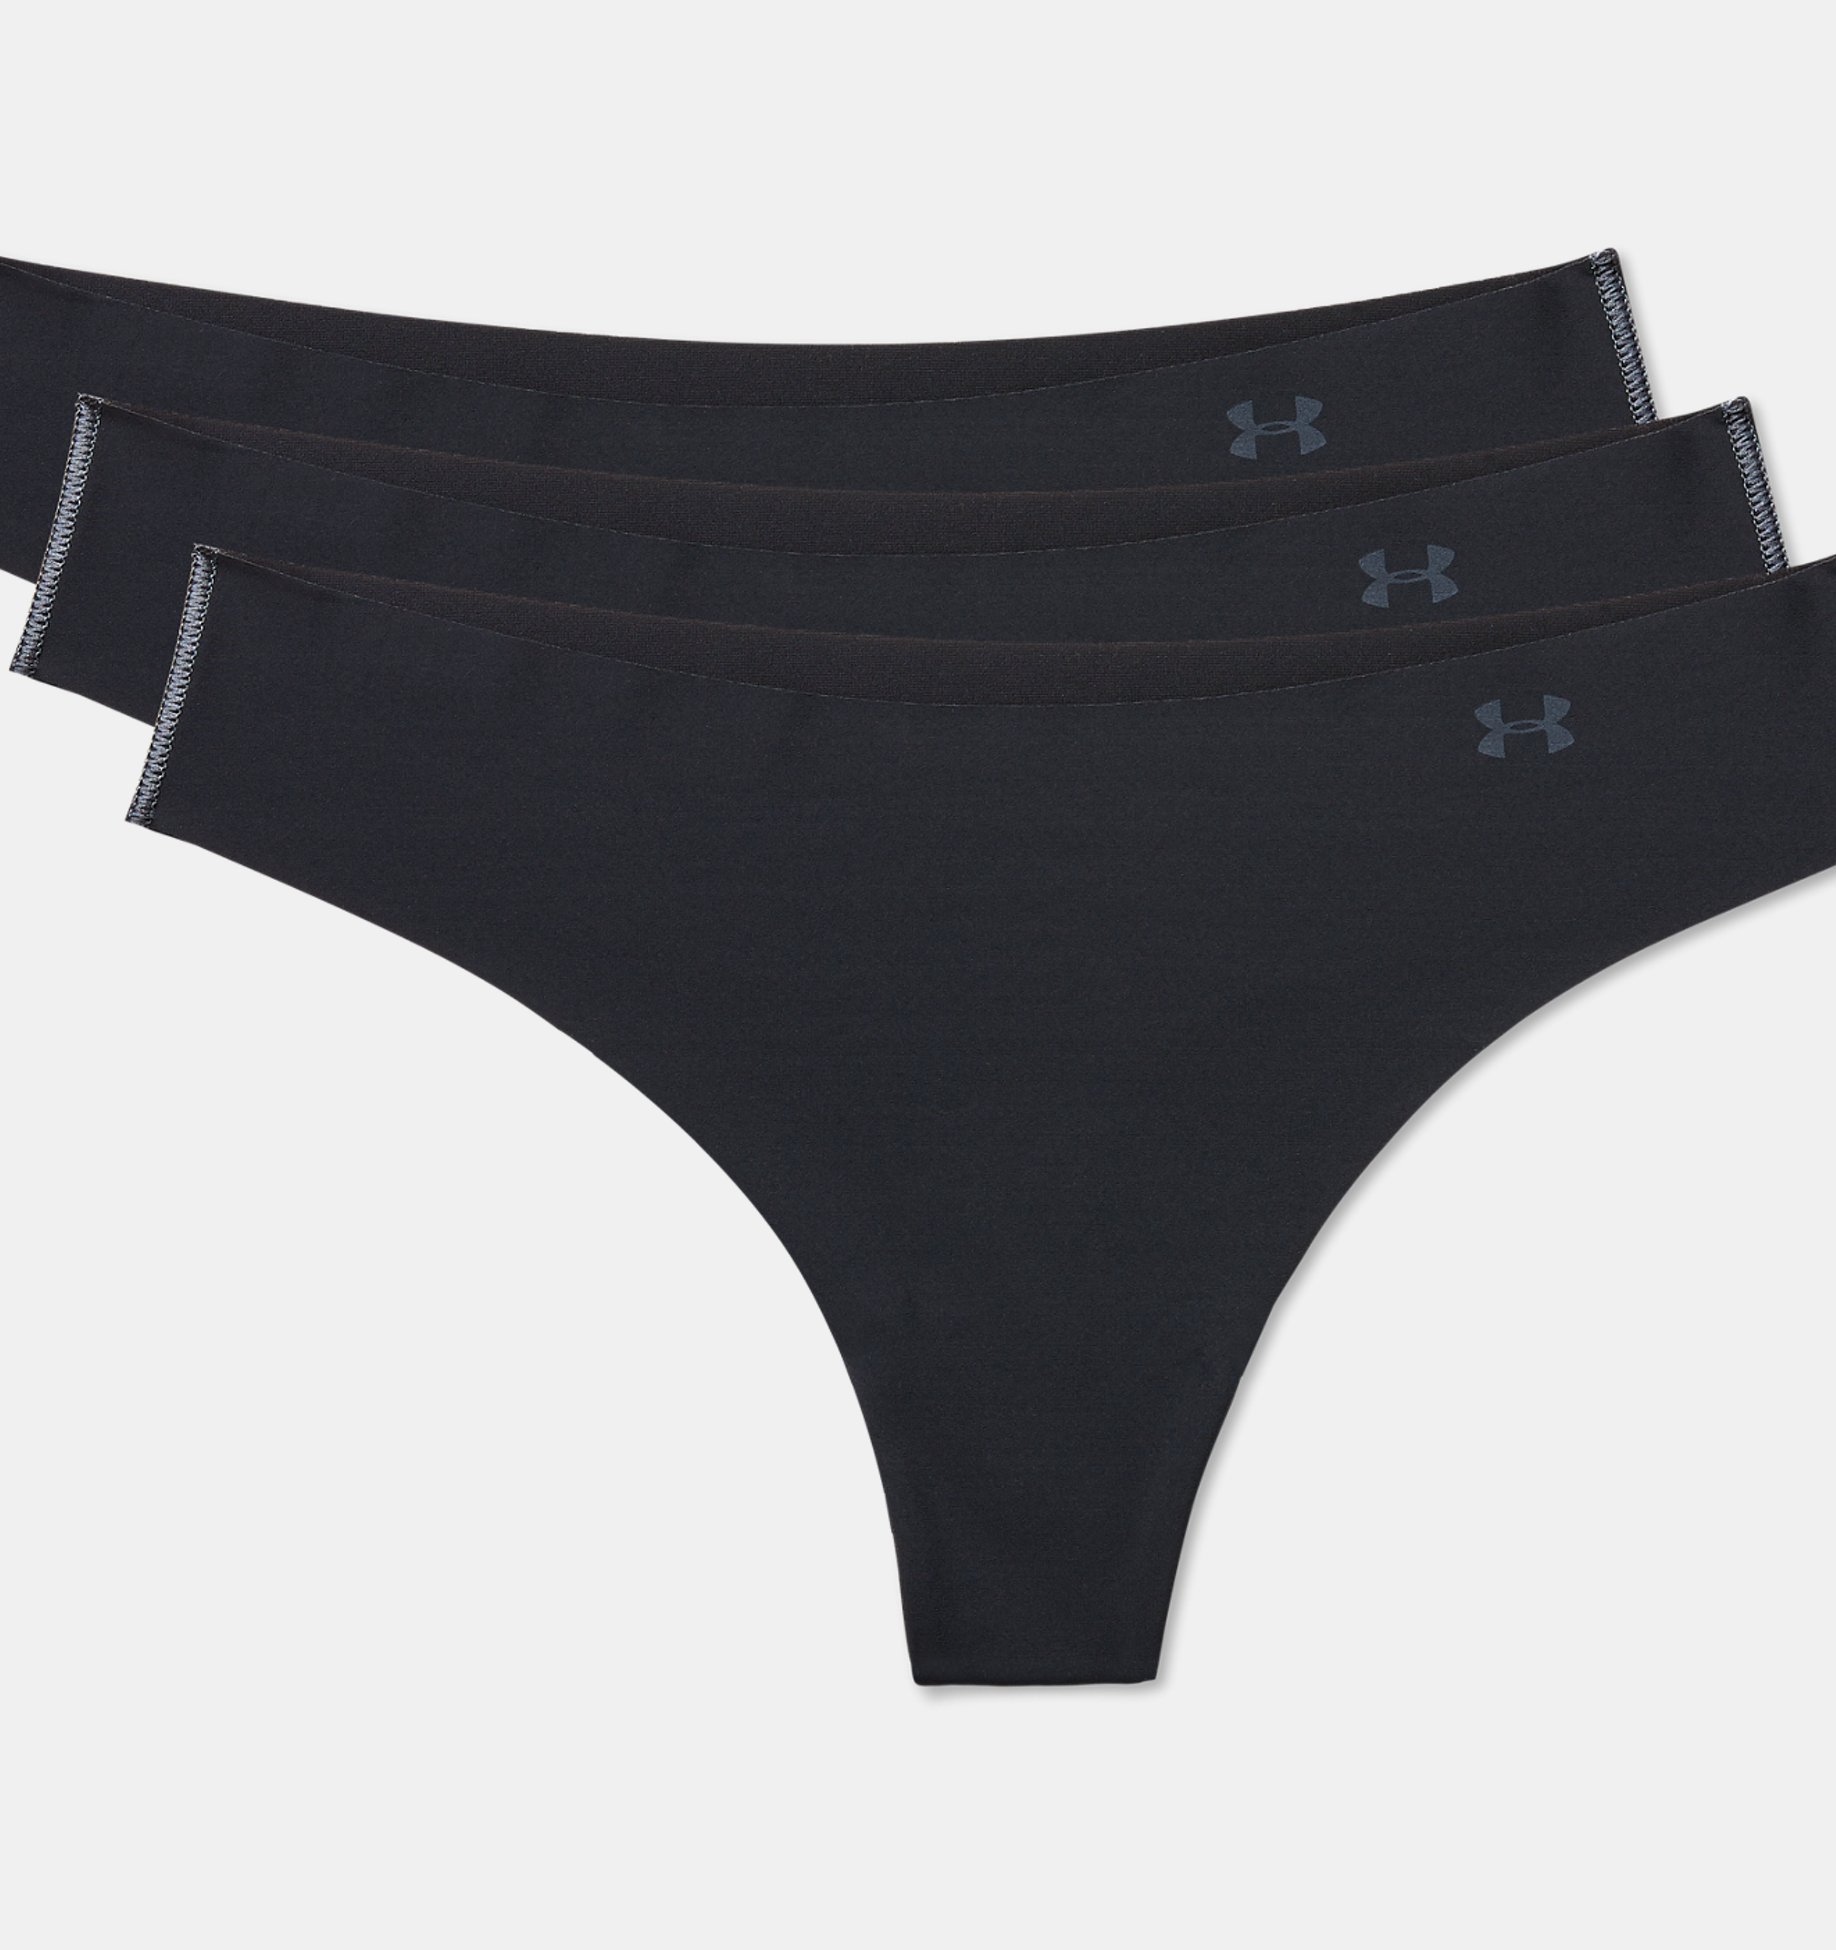 UNDER ARMOUR UA PURE STRETCH THONG Women's Underwear Large Black One Pair 